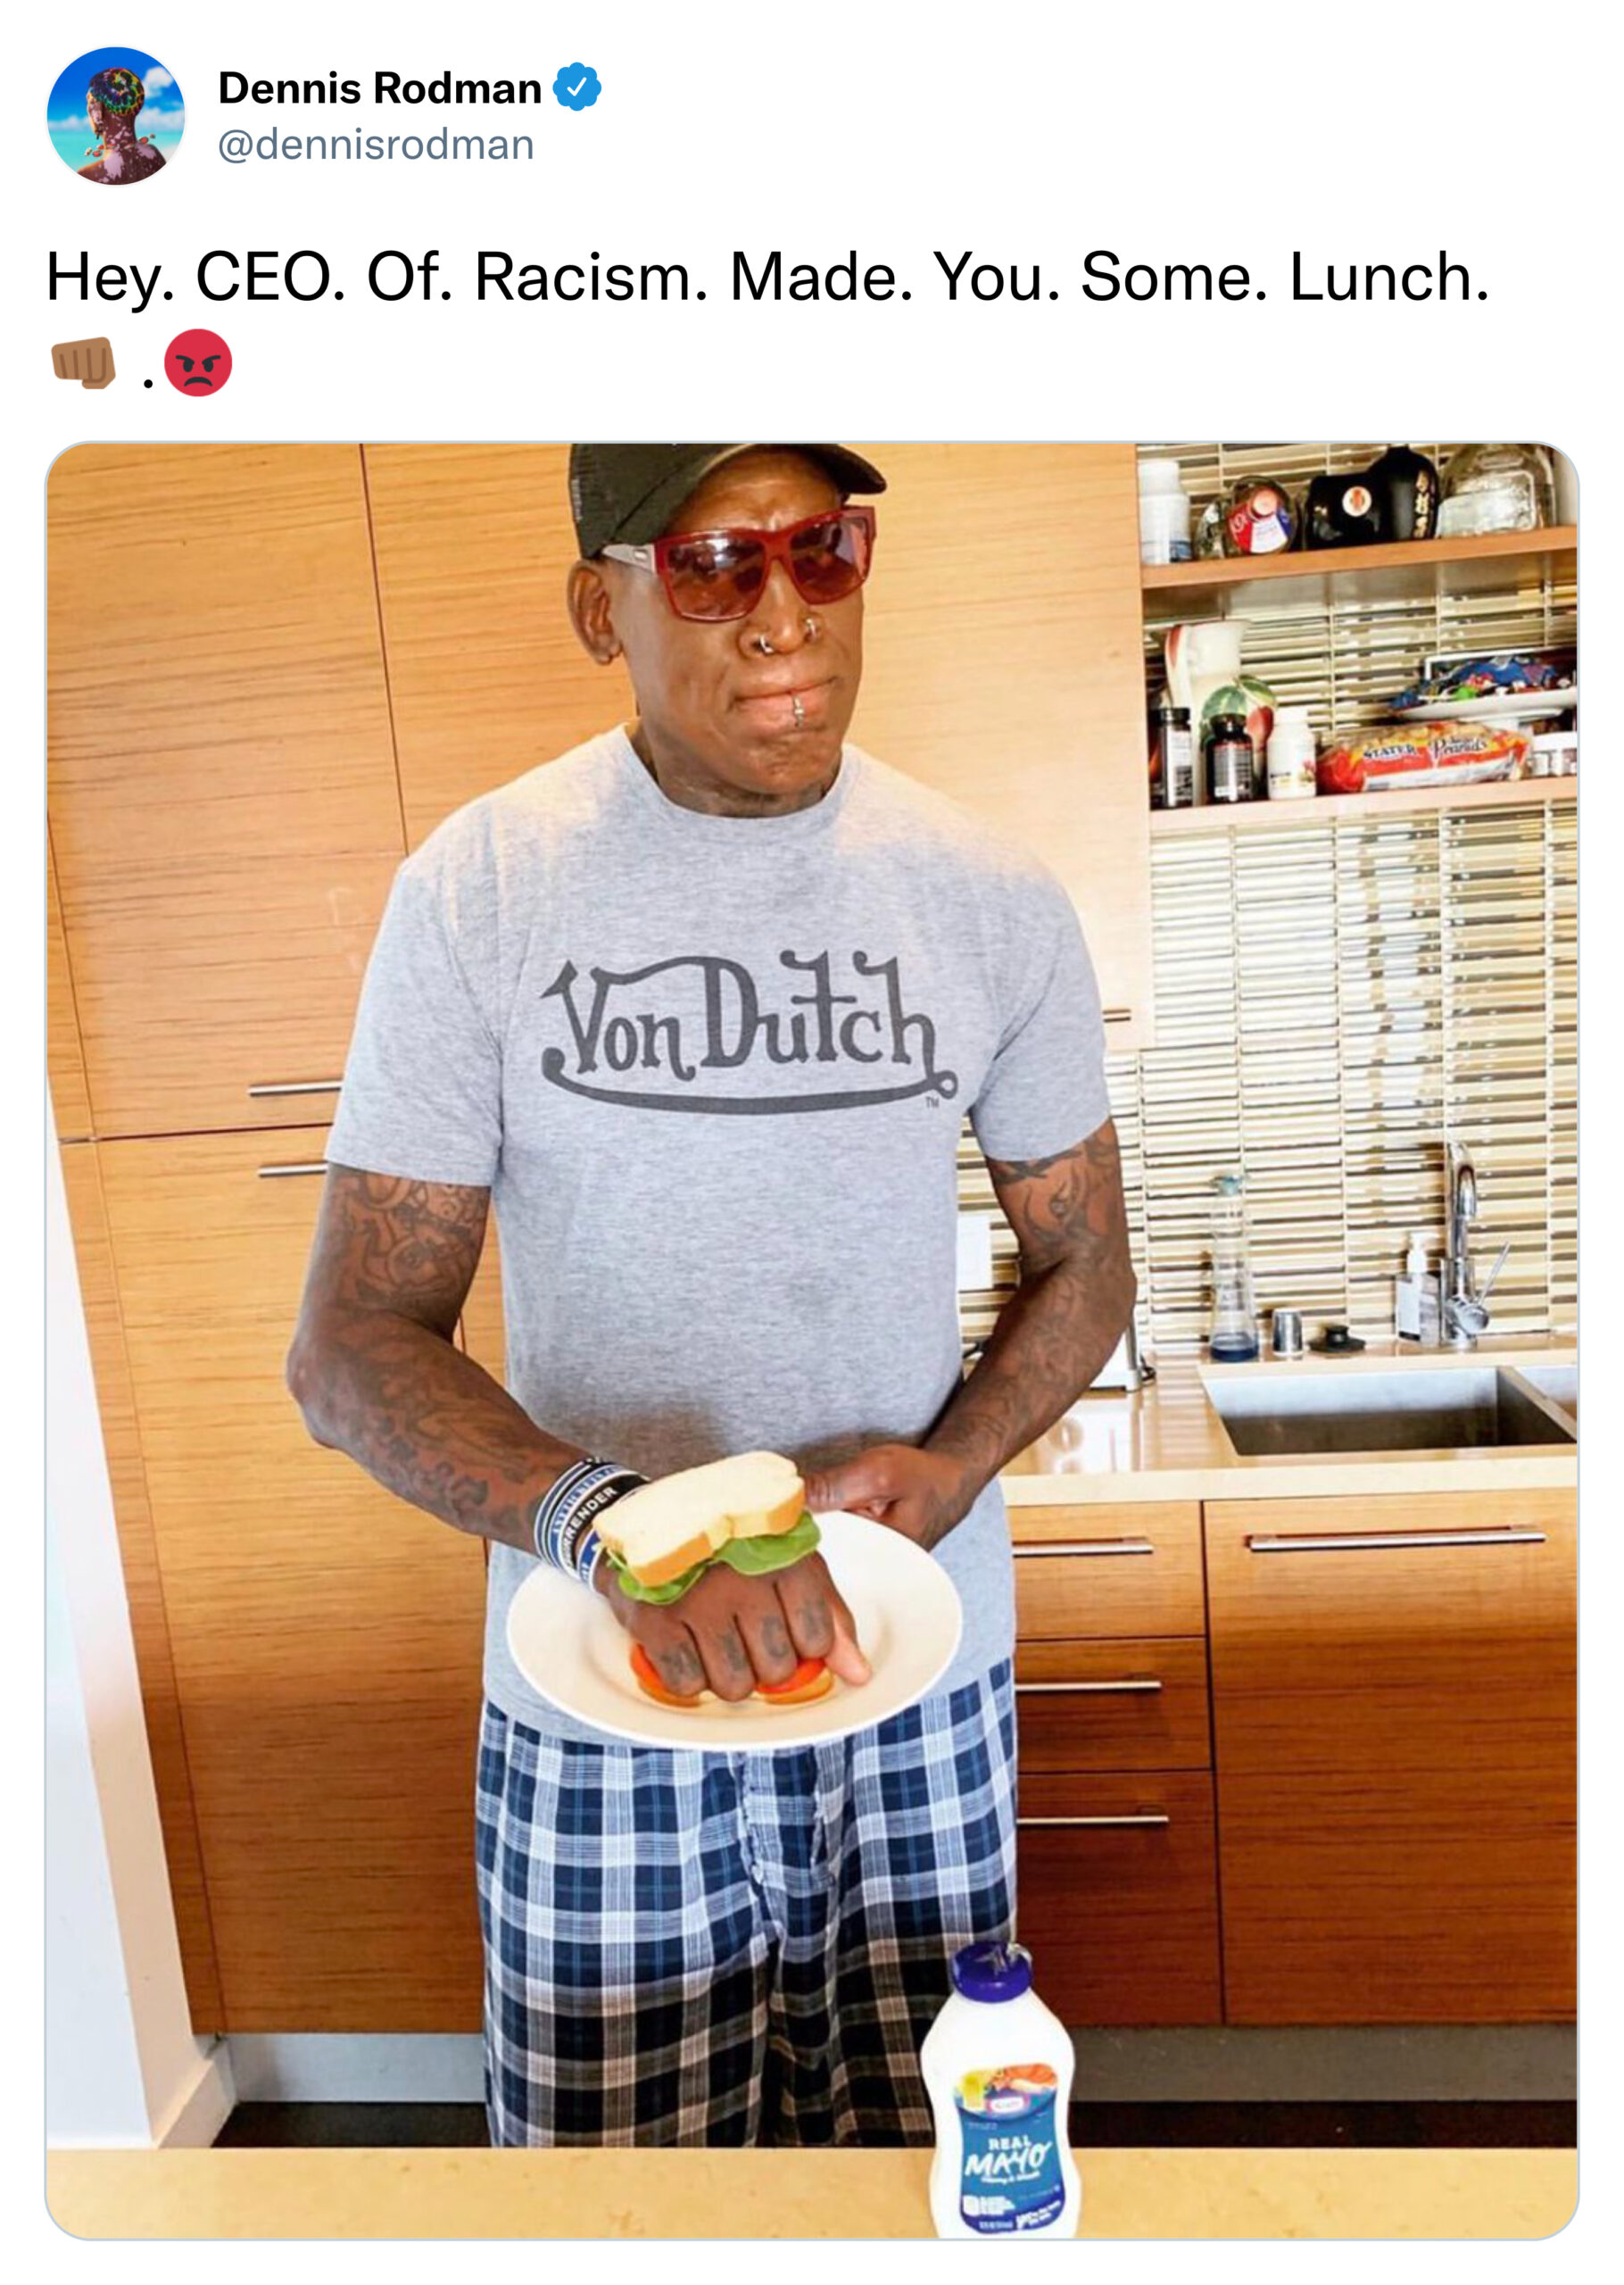 funny tweets and memes -  dennis rodman knuckle sandwich - Dennis Rodman Hey. Ceo. Of. Racism. Made. You. Some. Lunch. Von Dutch May